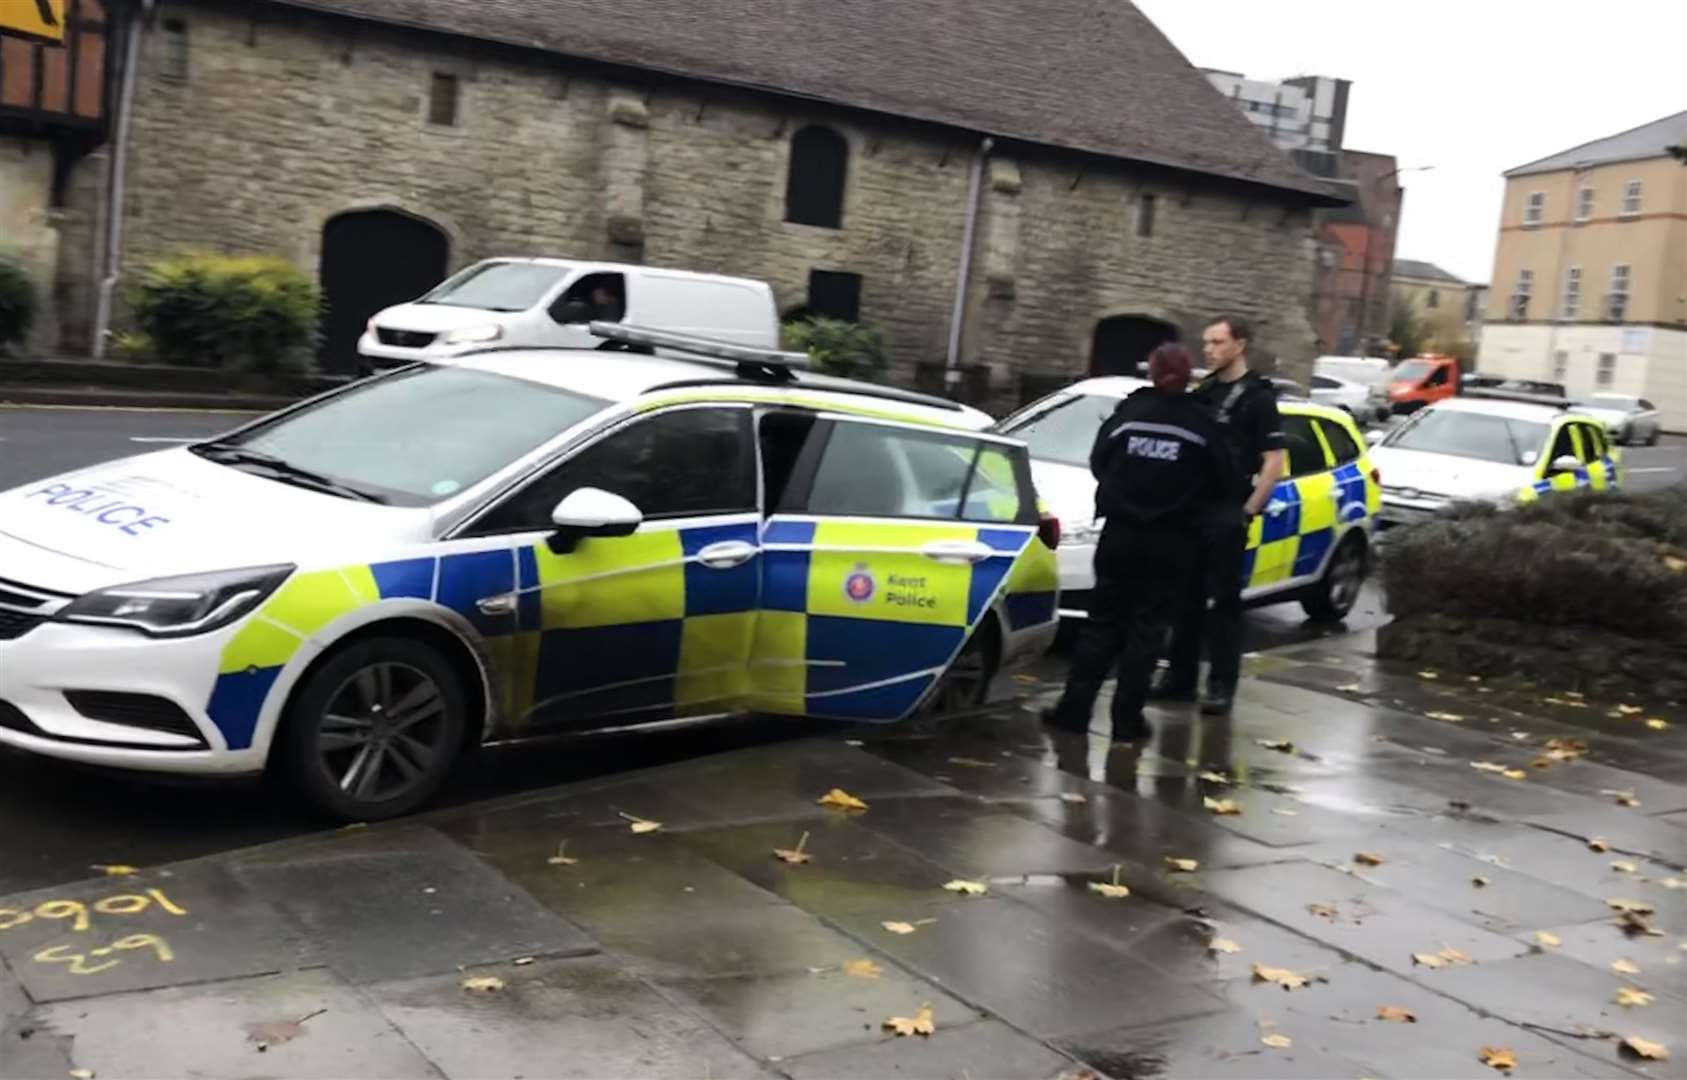 Police cars were seen outside Archbishop's Palace